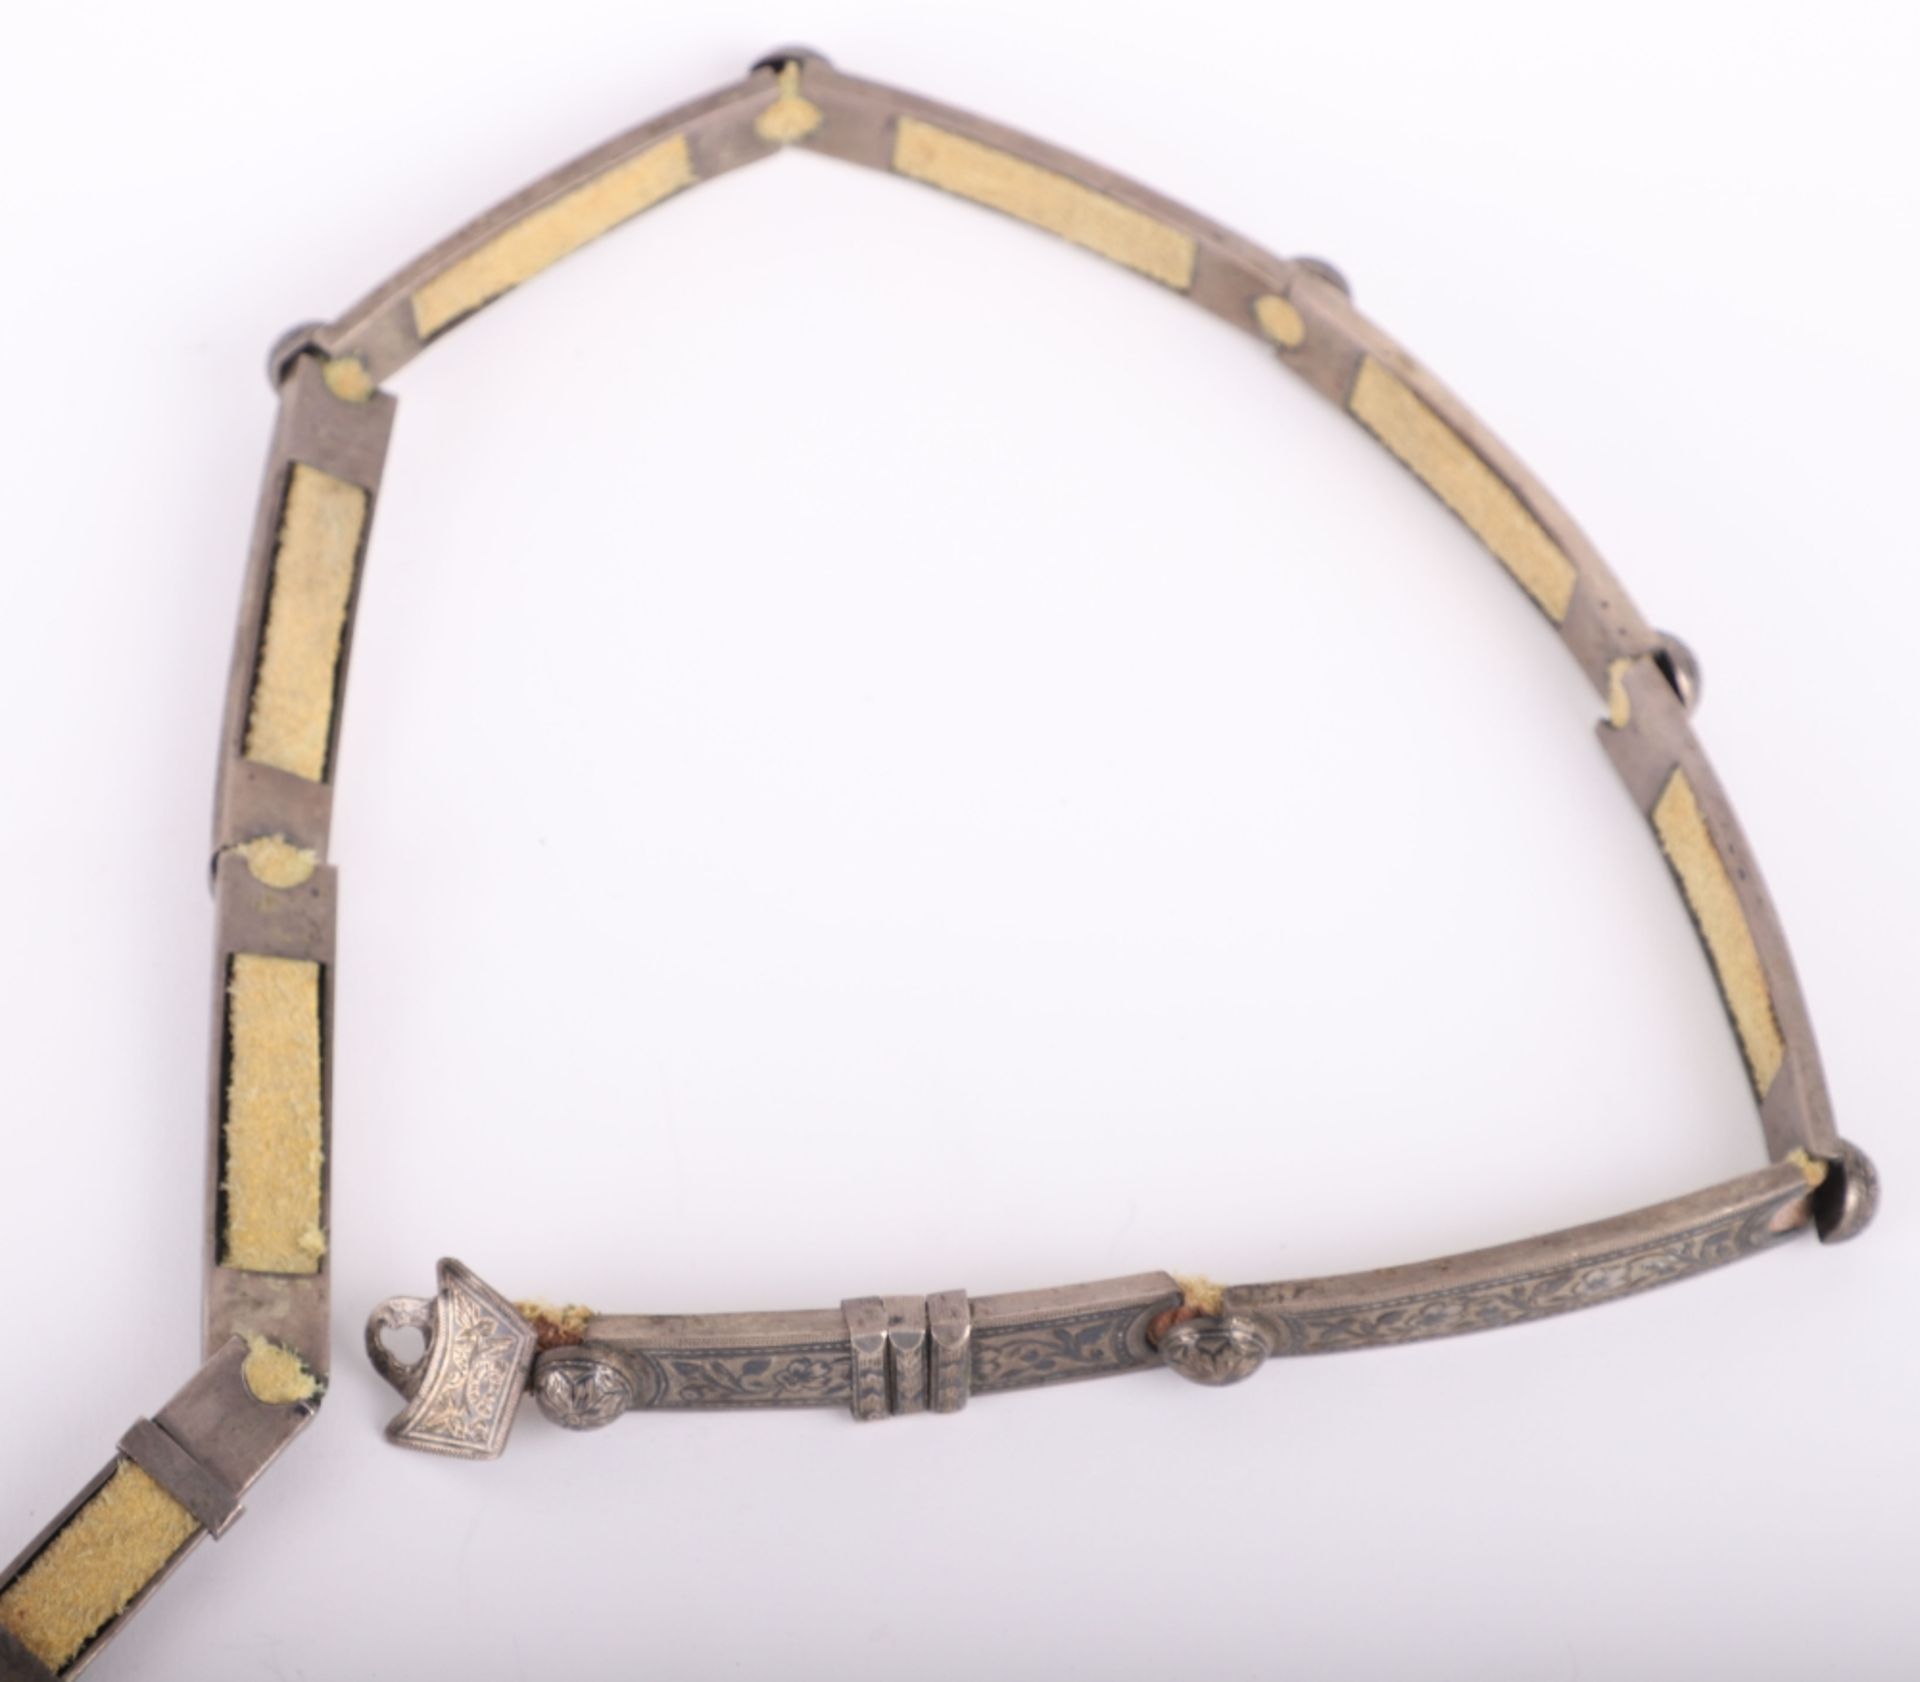 Fine Quality Late 19th Century / Early 20th Century Russian Kinjal Belt - Image 6 of 8